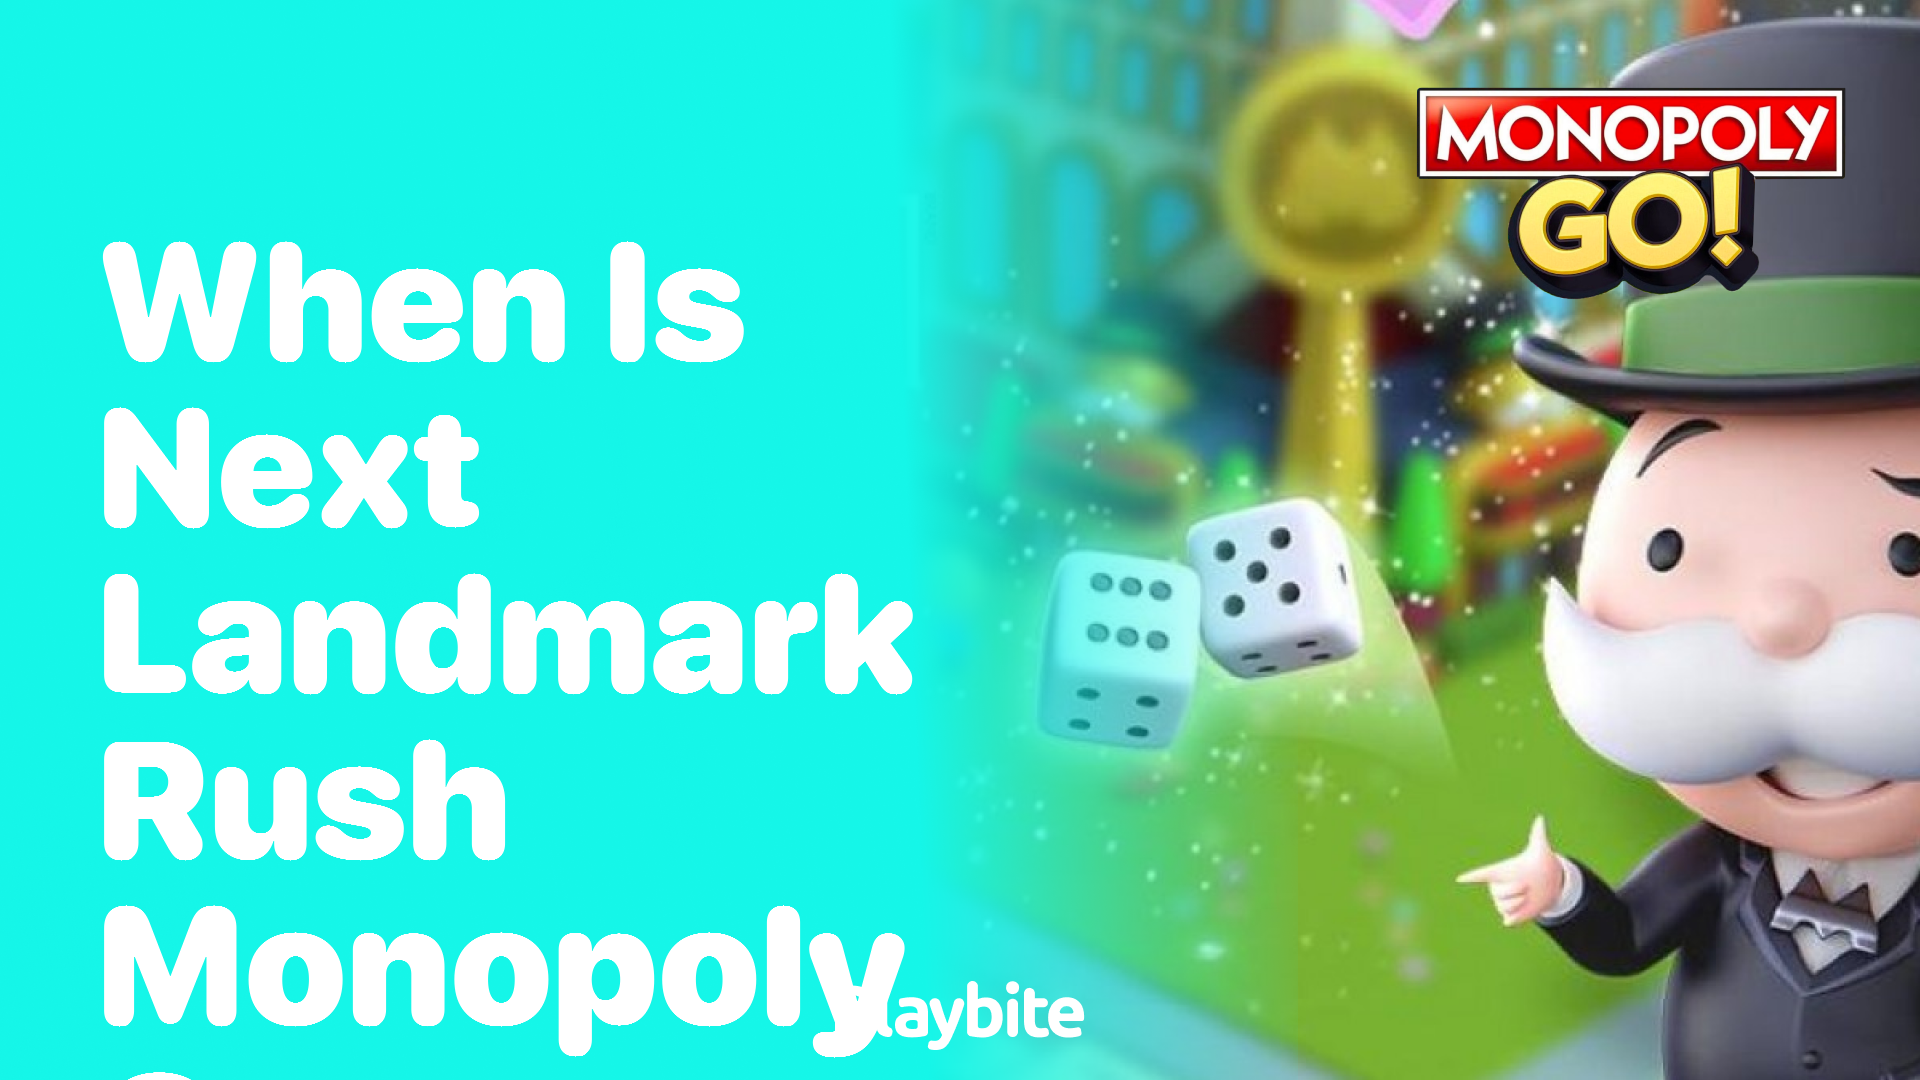 When is the Next Landmark Rush in Monopoly Go?